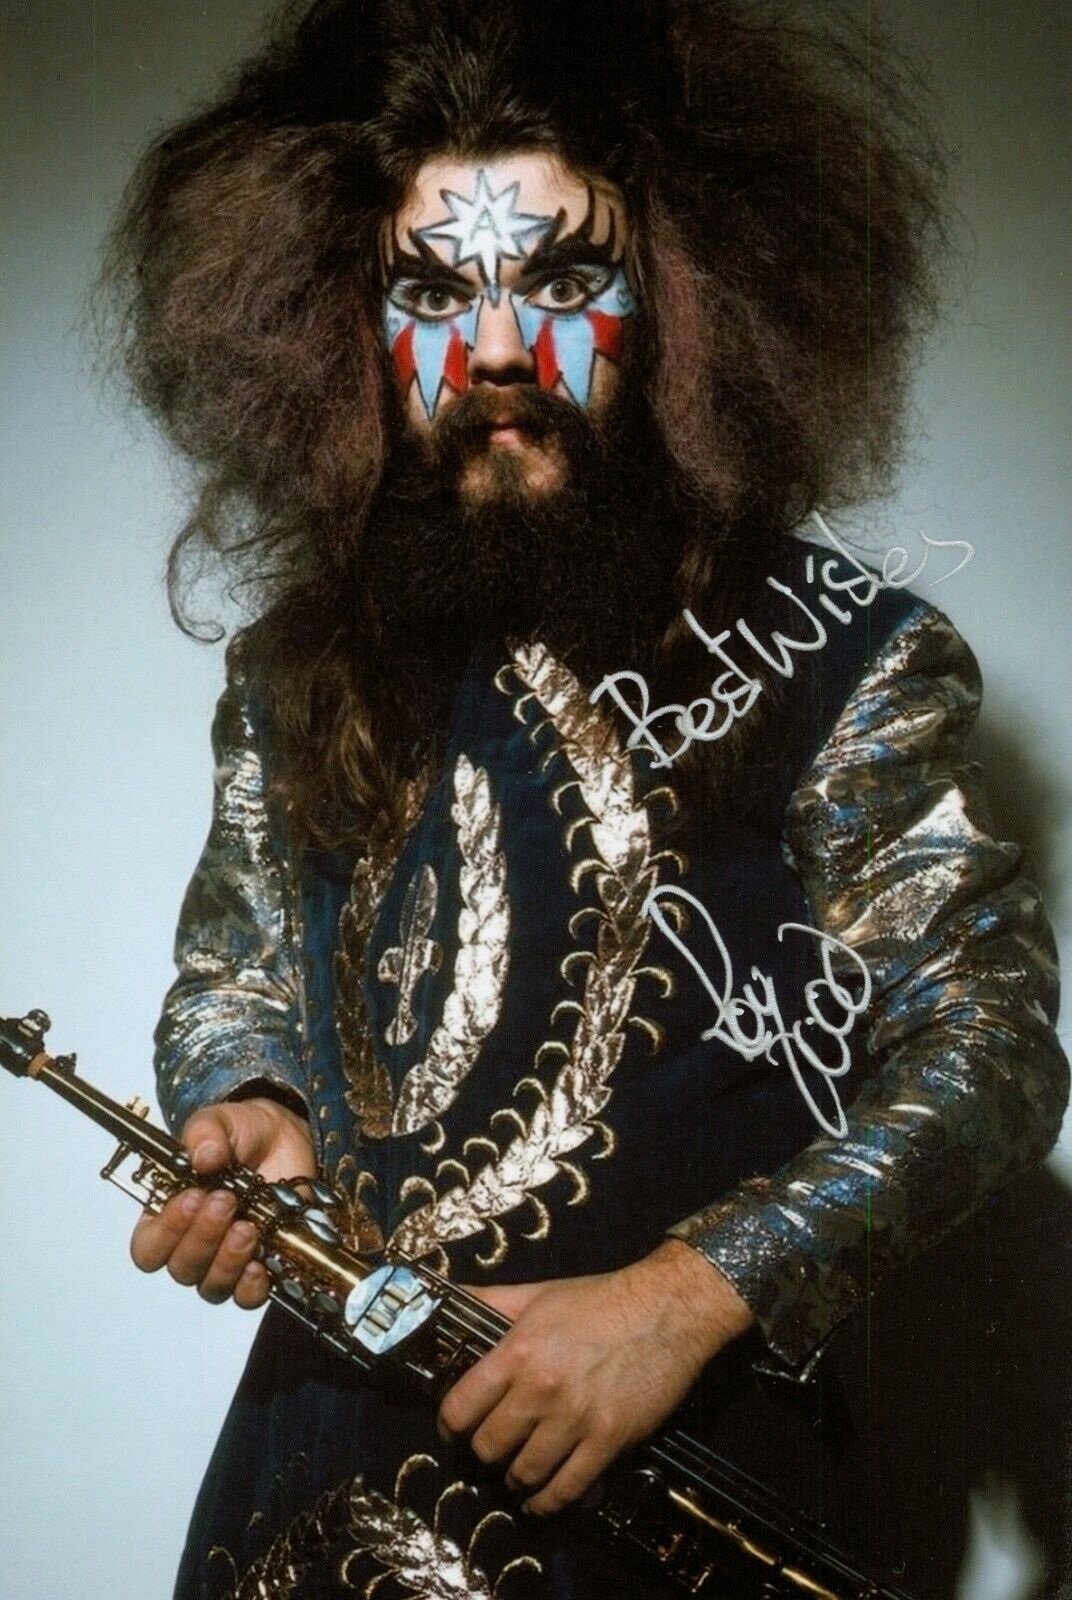 Roy Wood Signed 6x4 Photo Poster painting Wizzard Glam Rock Psychedelic Genuine Autograph + COA